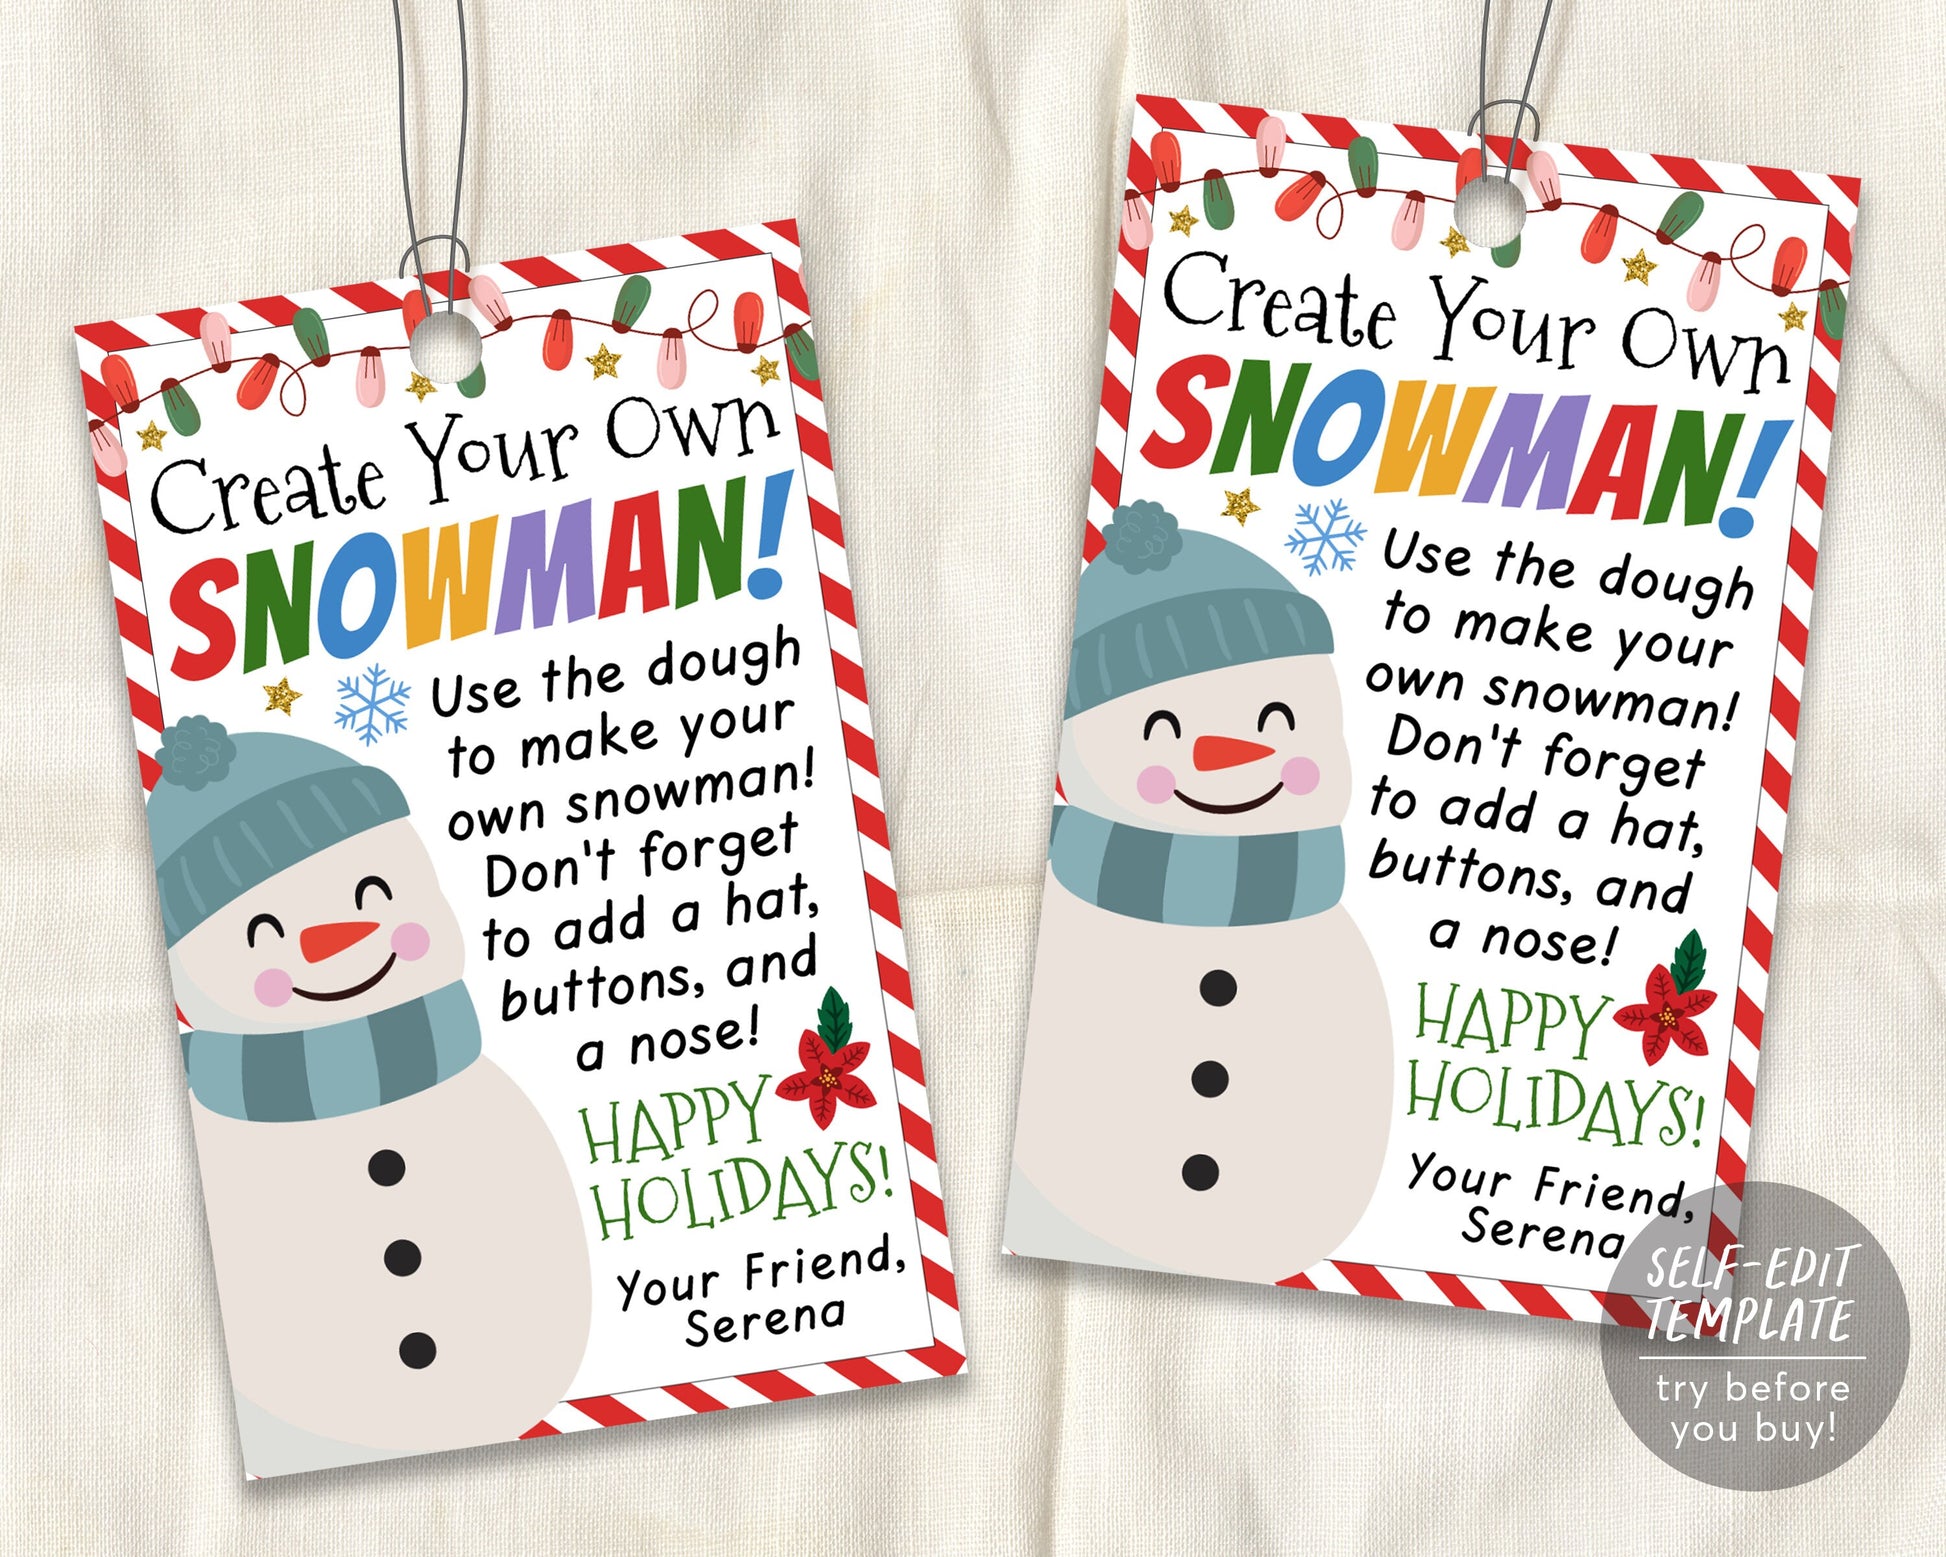 Happy Holidays Gift Tags Free Printable  Free holiday gift tags, Happy holidays  gift tags printable, Christmas gift tags printable